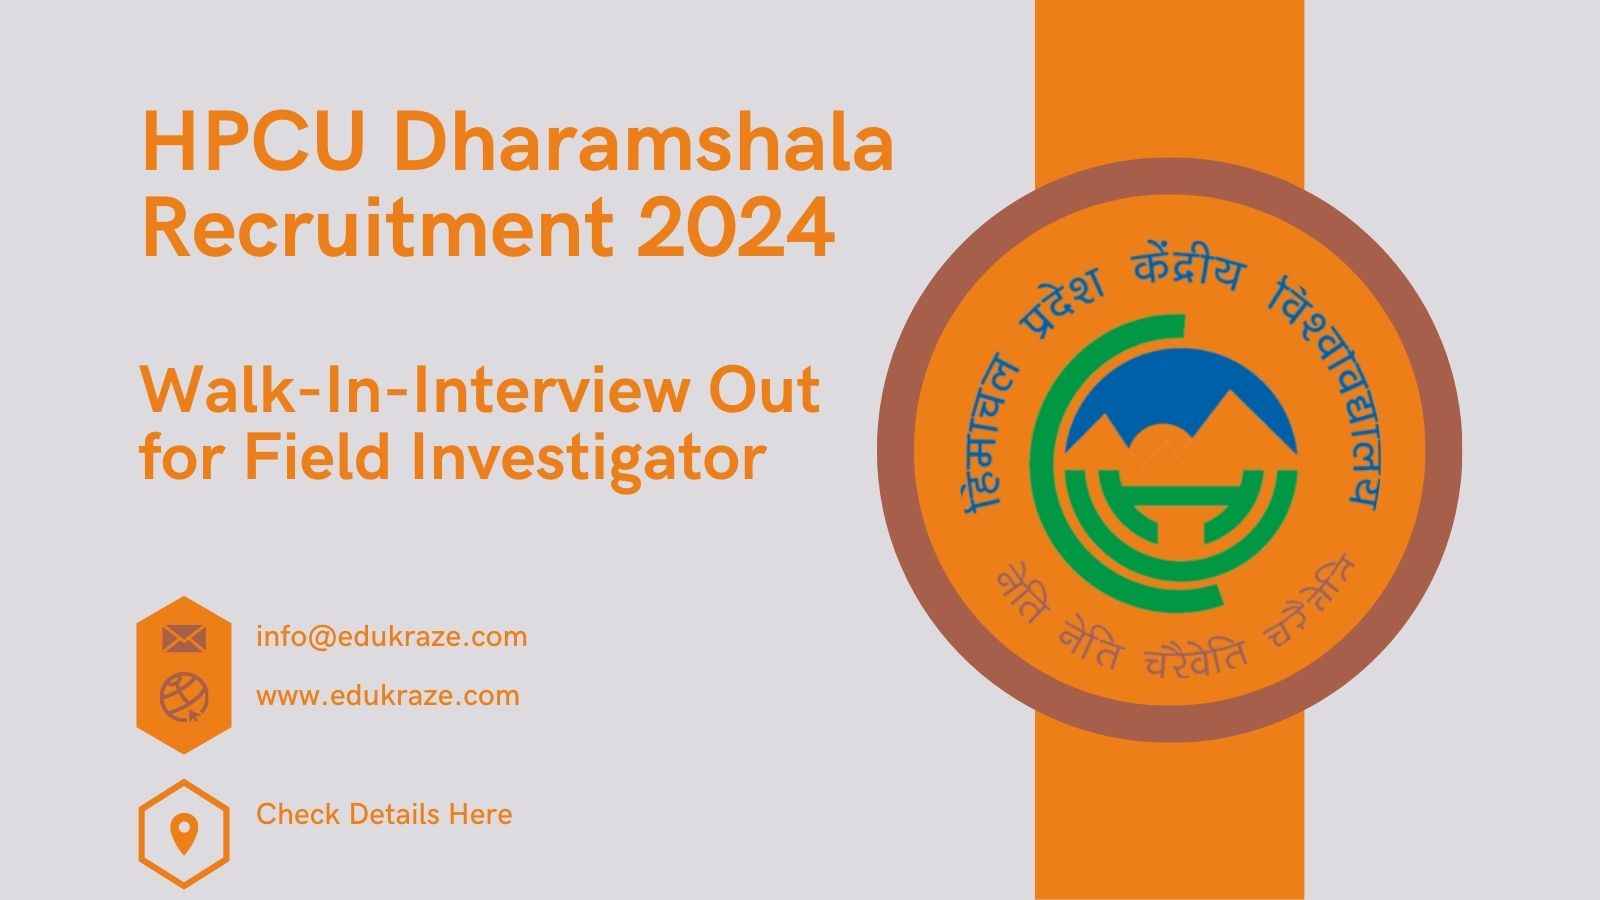 HPCU Dharamshala Recruitment 2024, Walk-In-Interview Out for Field Investigator